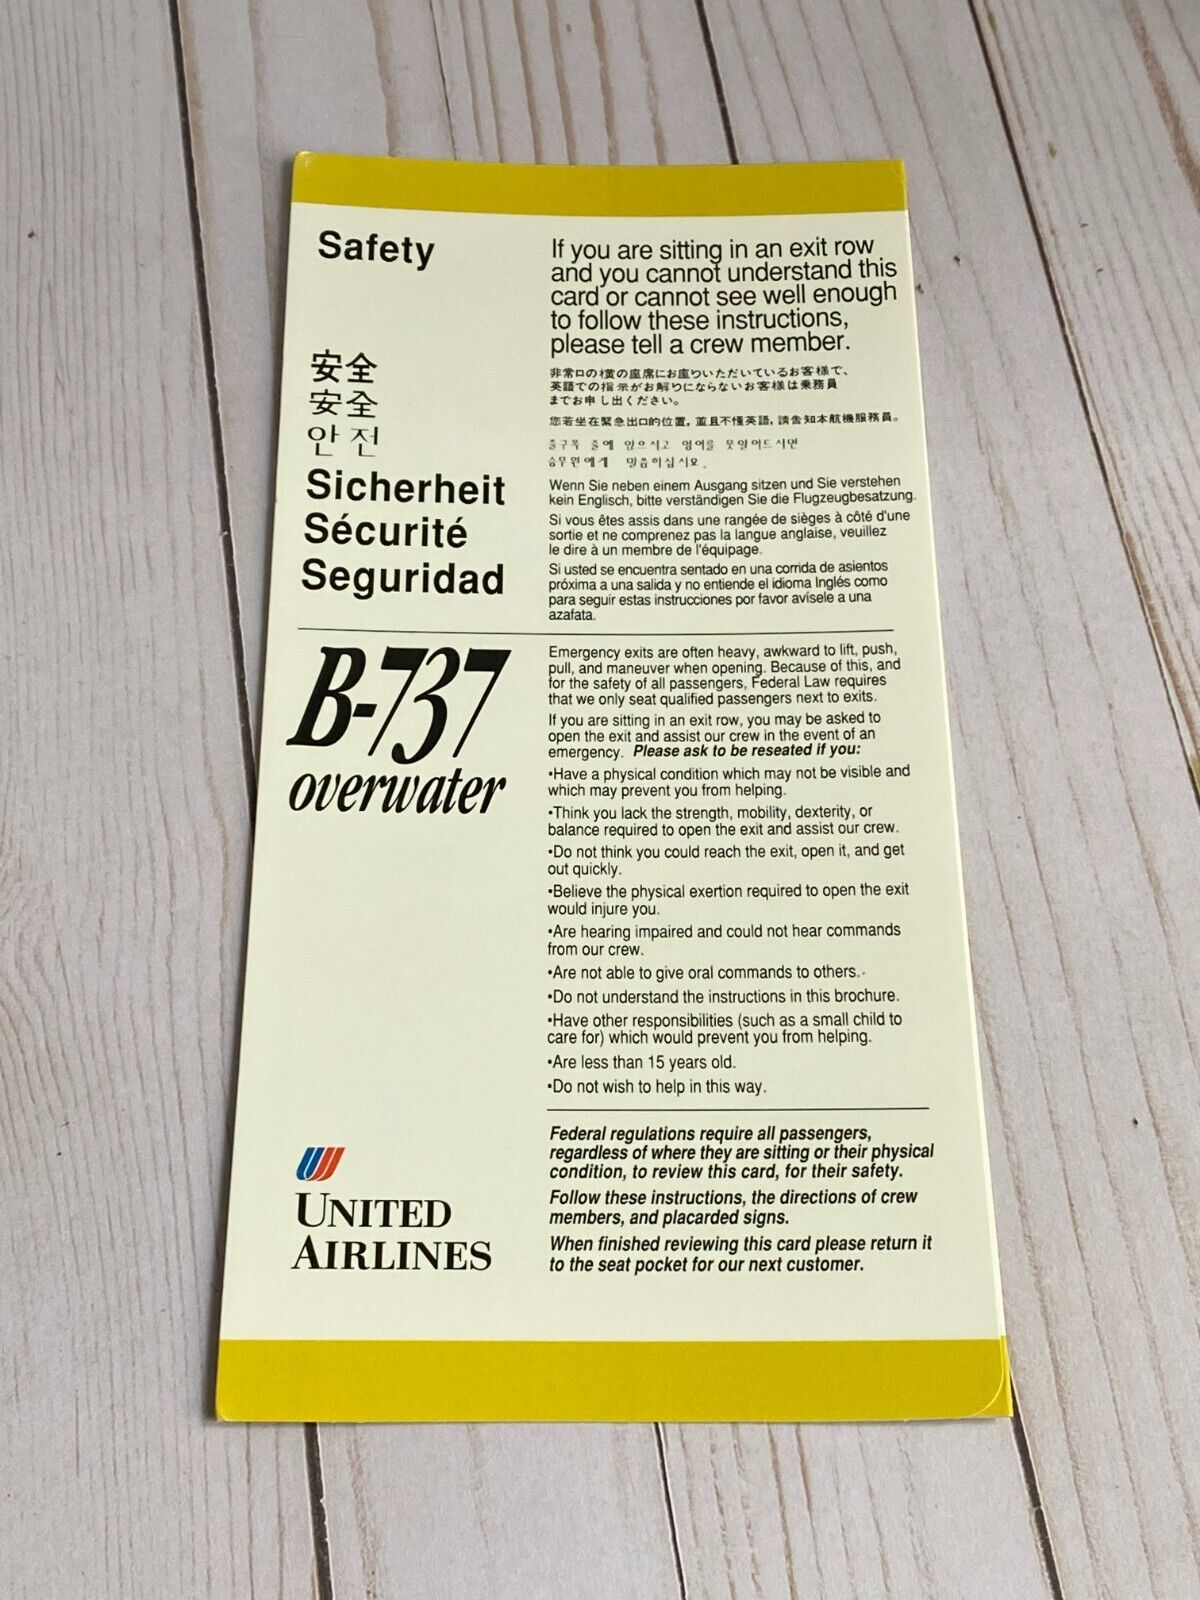 United Airlines Boeing 737 Overwater Safety Card - 4/92